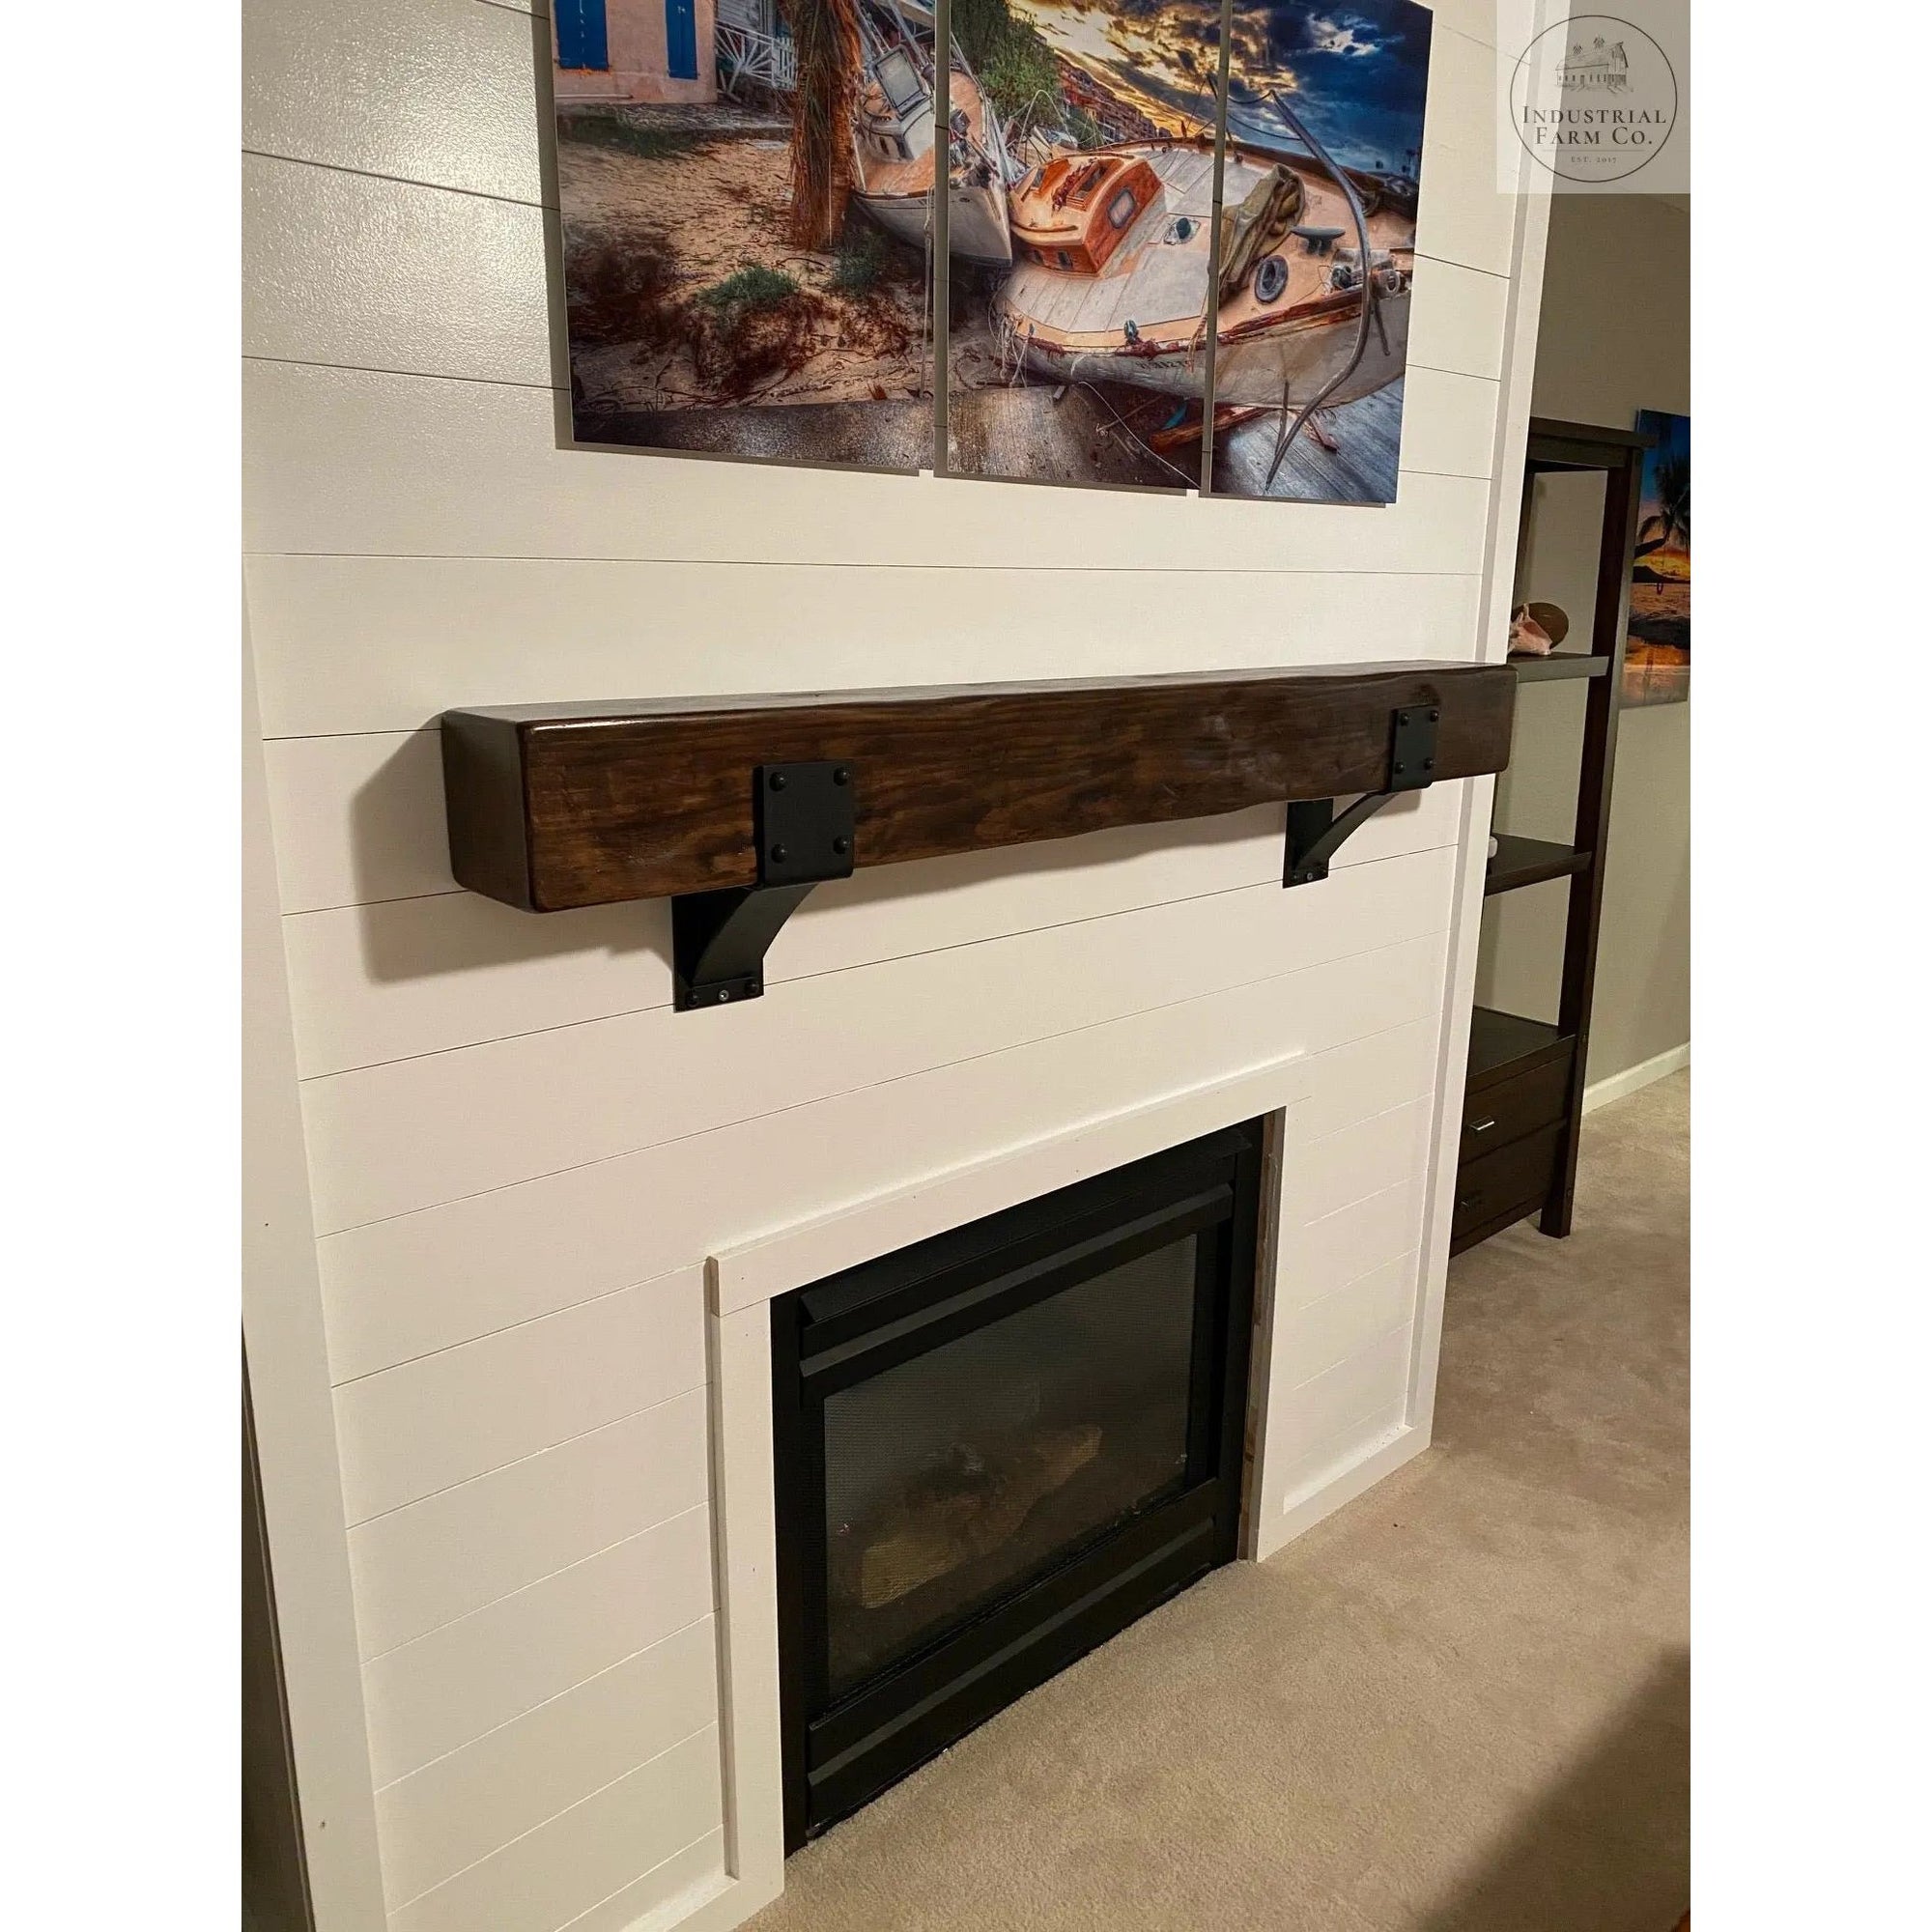 The Clermont Farmhouse Shelf Mantle Support Brackets/Corbels 6" Depth x 8" Wall Mount Length Finish Raw - Uncoated Metal | Industrial Farm Co